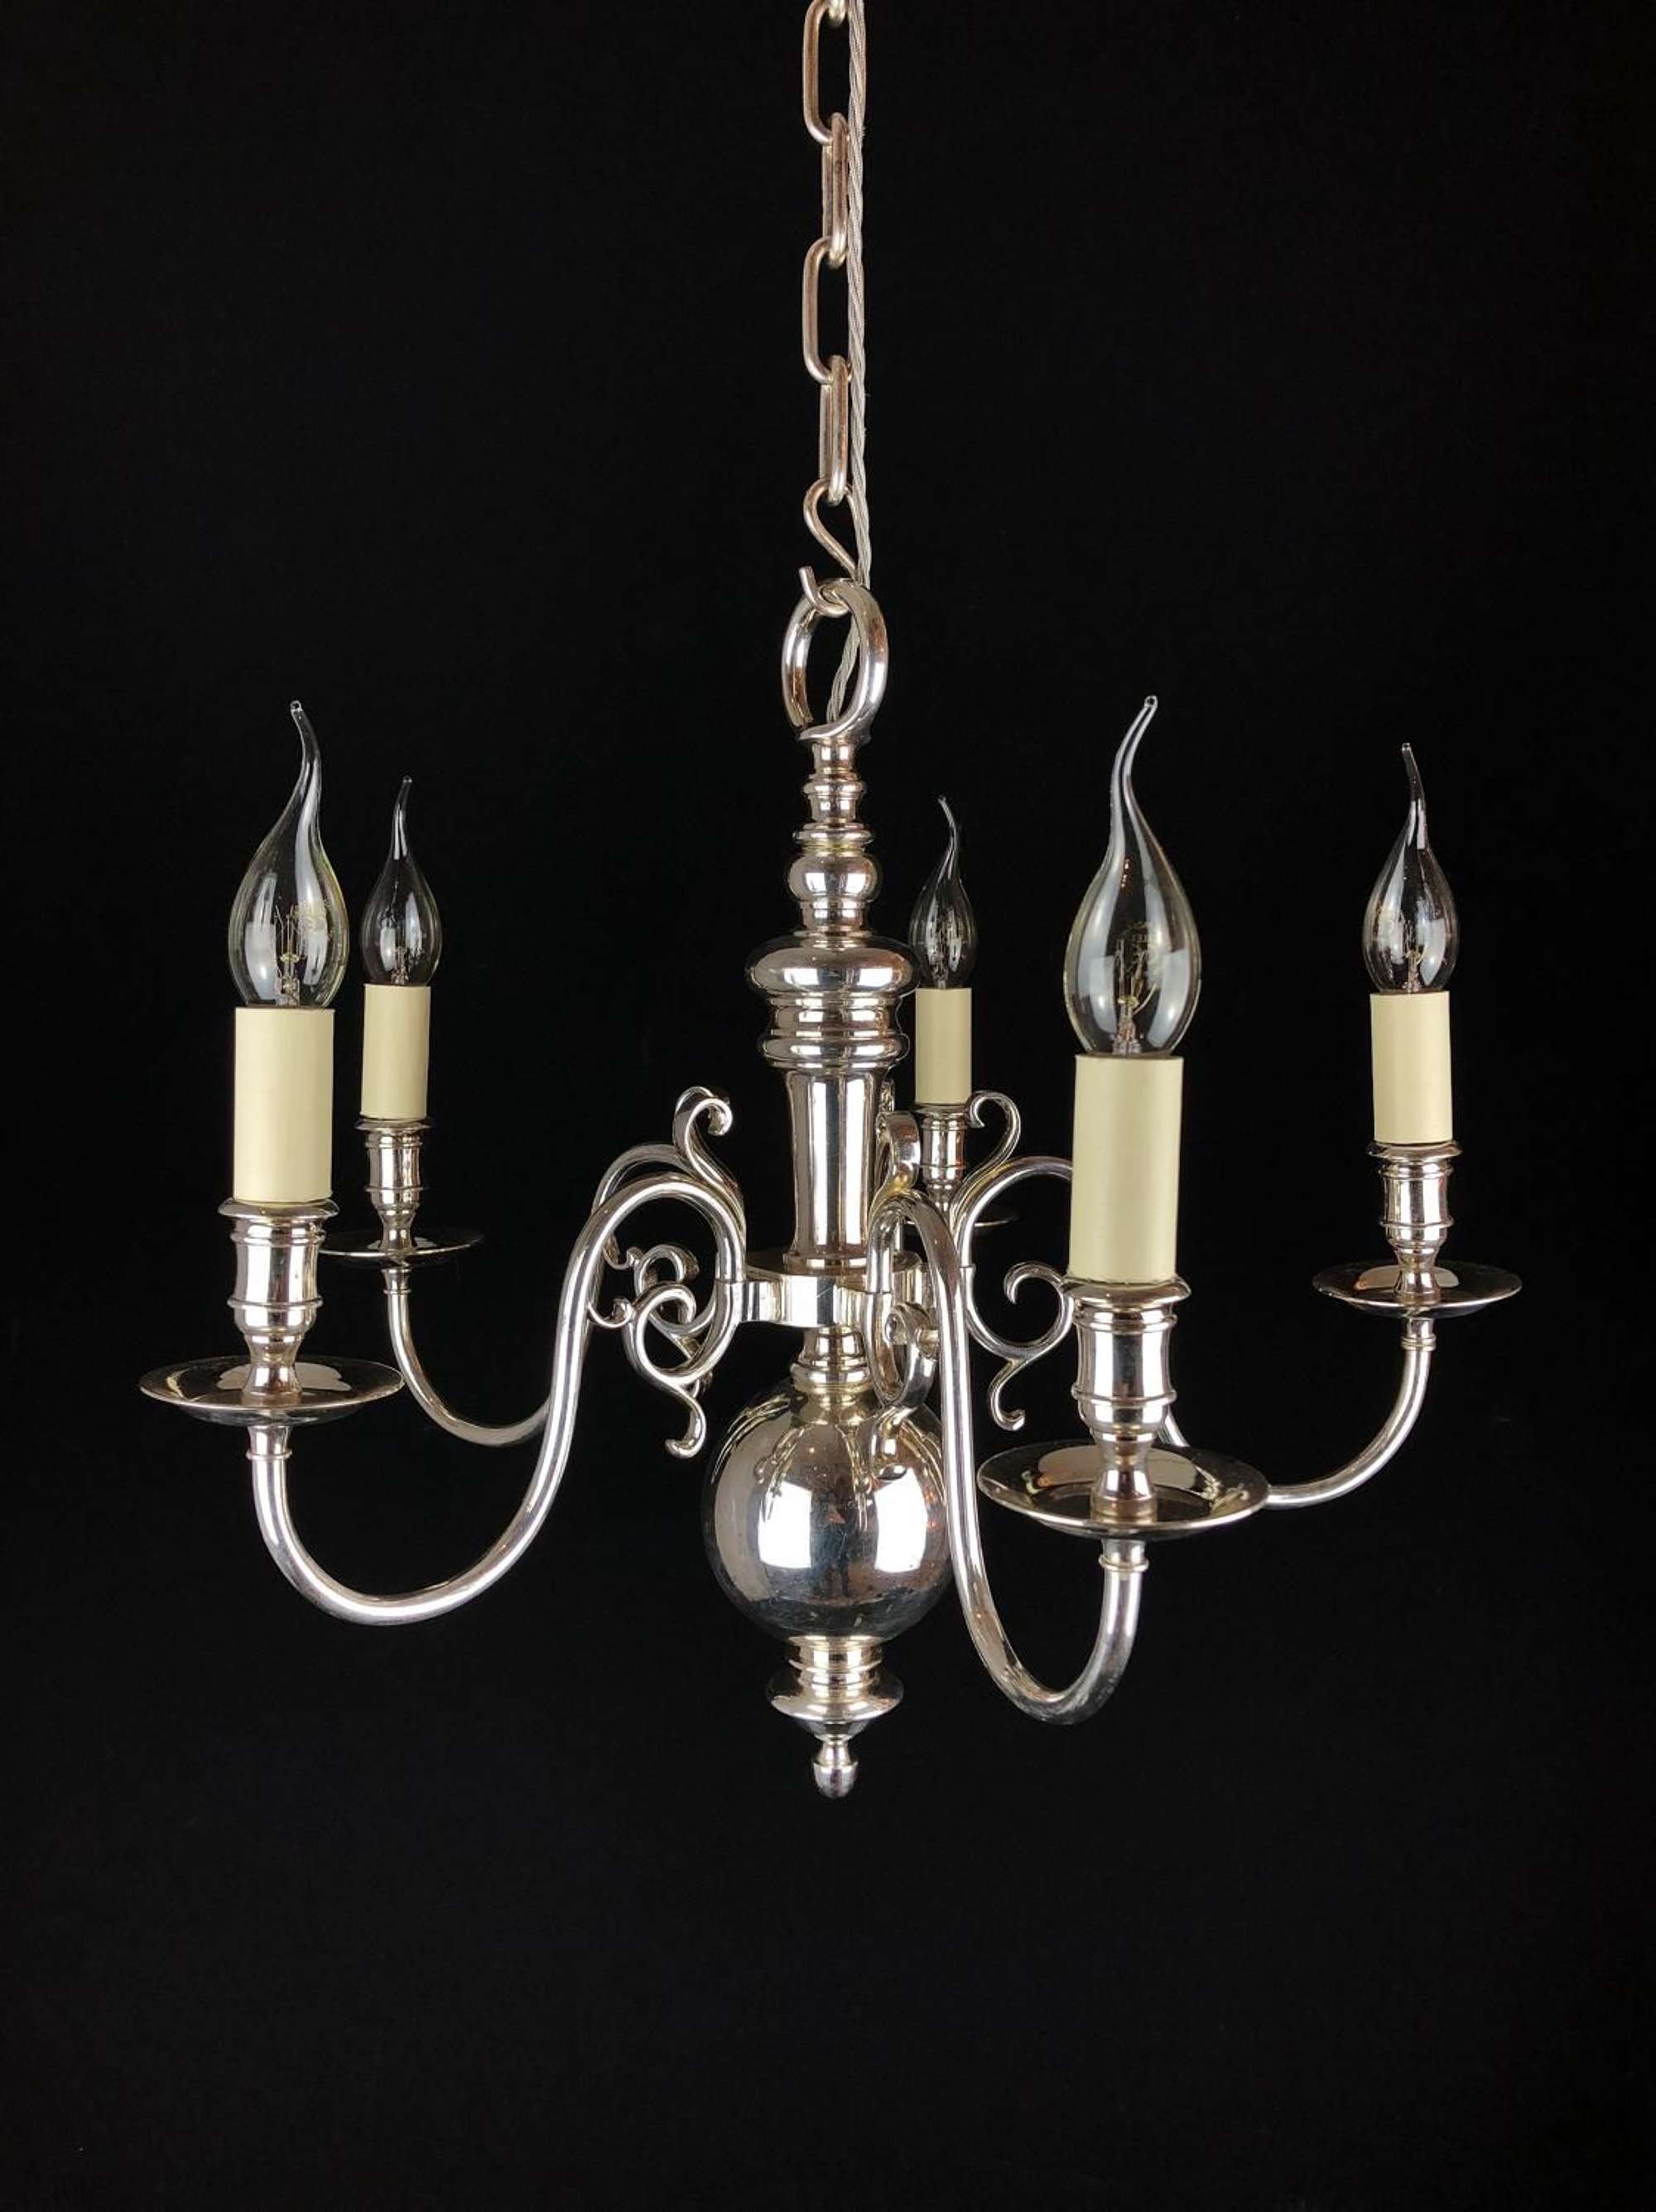 A silvered Dutch style chandelier